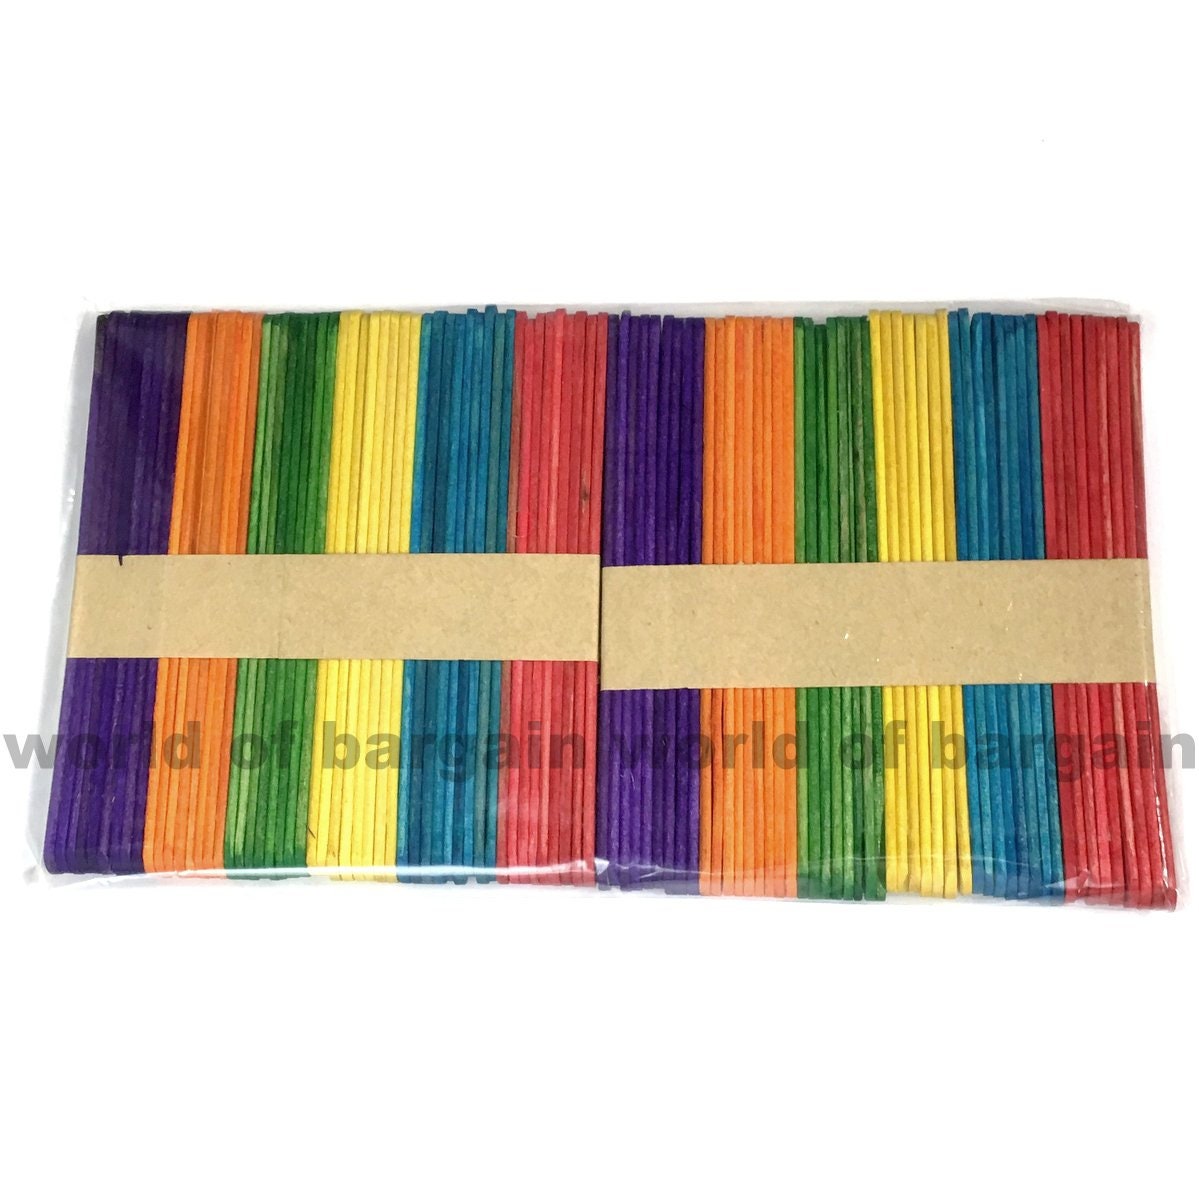 100 Pcs New Colored Natural Wood Popsicle Sticks Wooden Craft Sticks 4-1/2 x 3/8